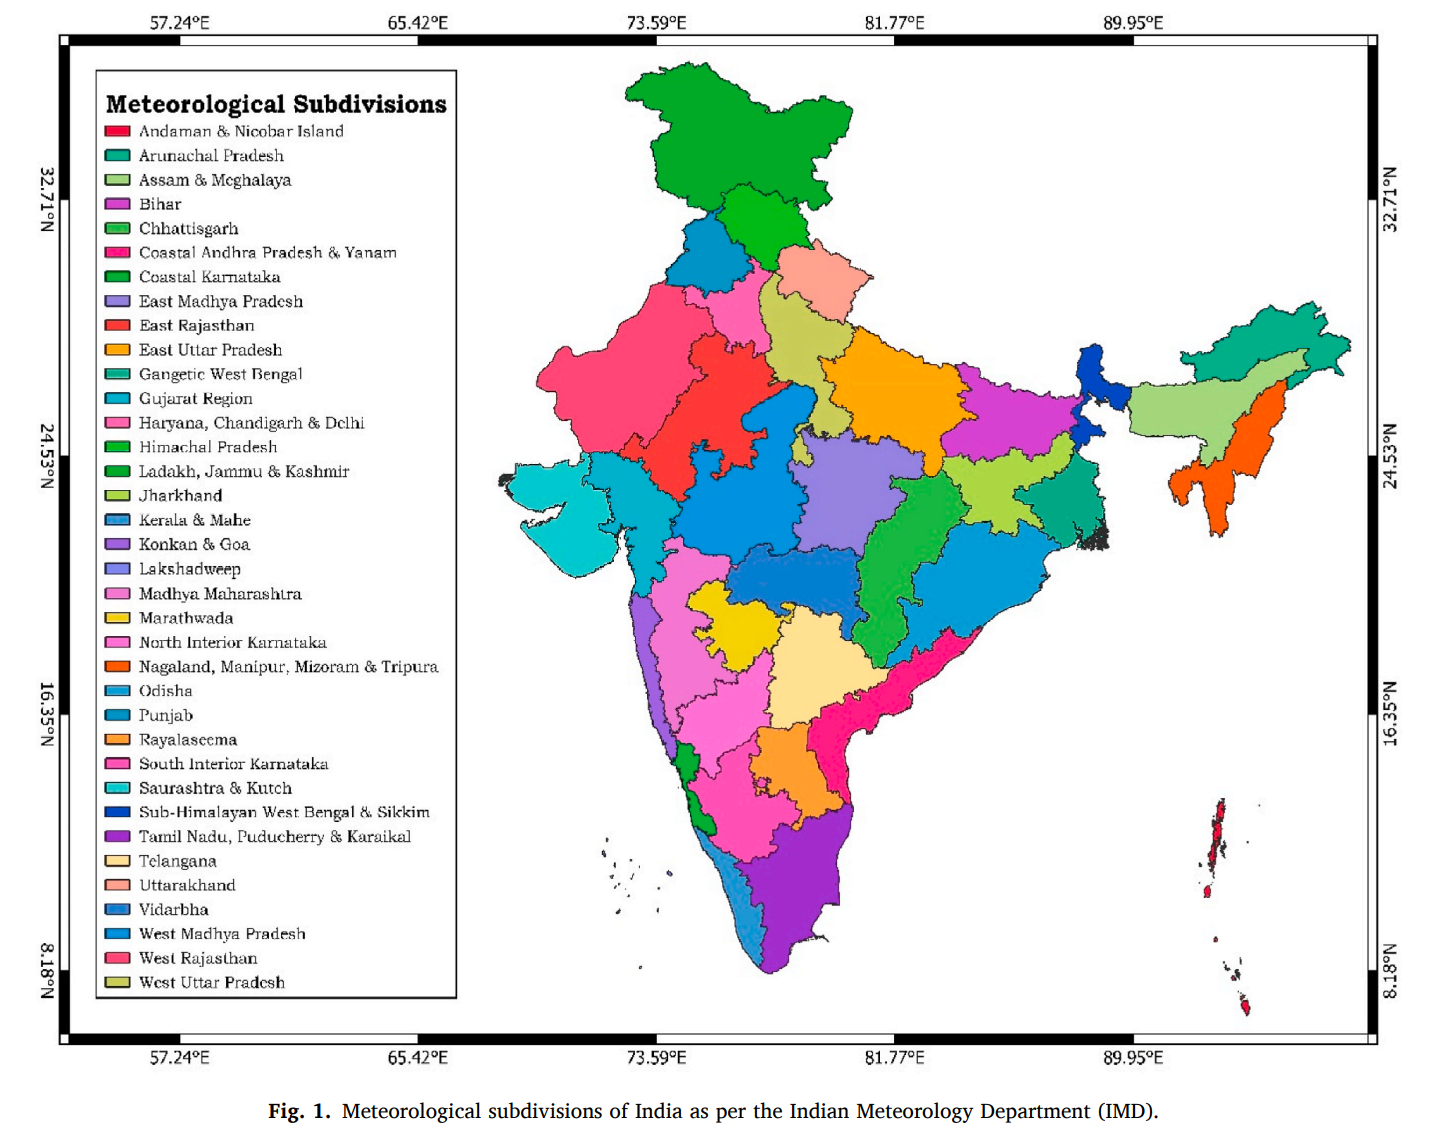 Meteorological divisions of India